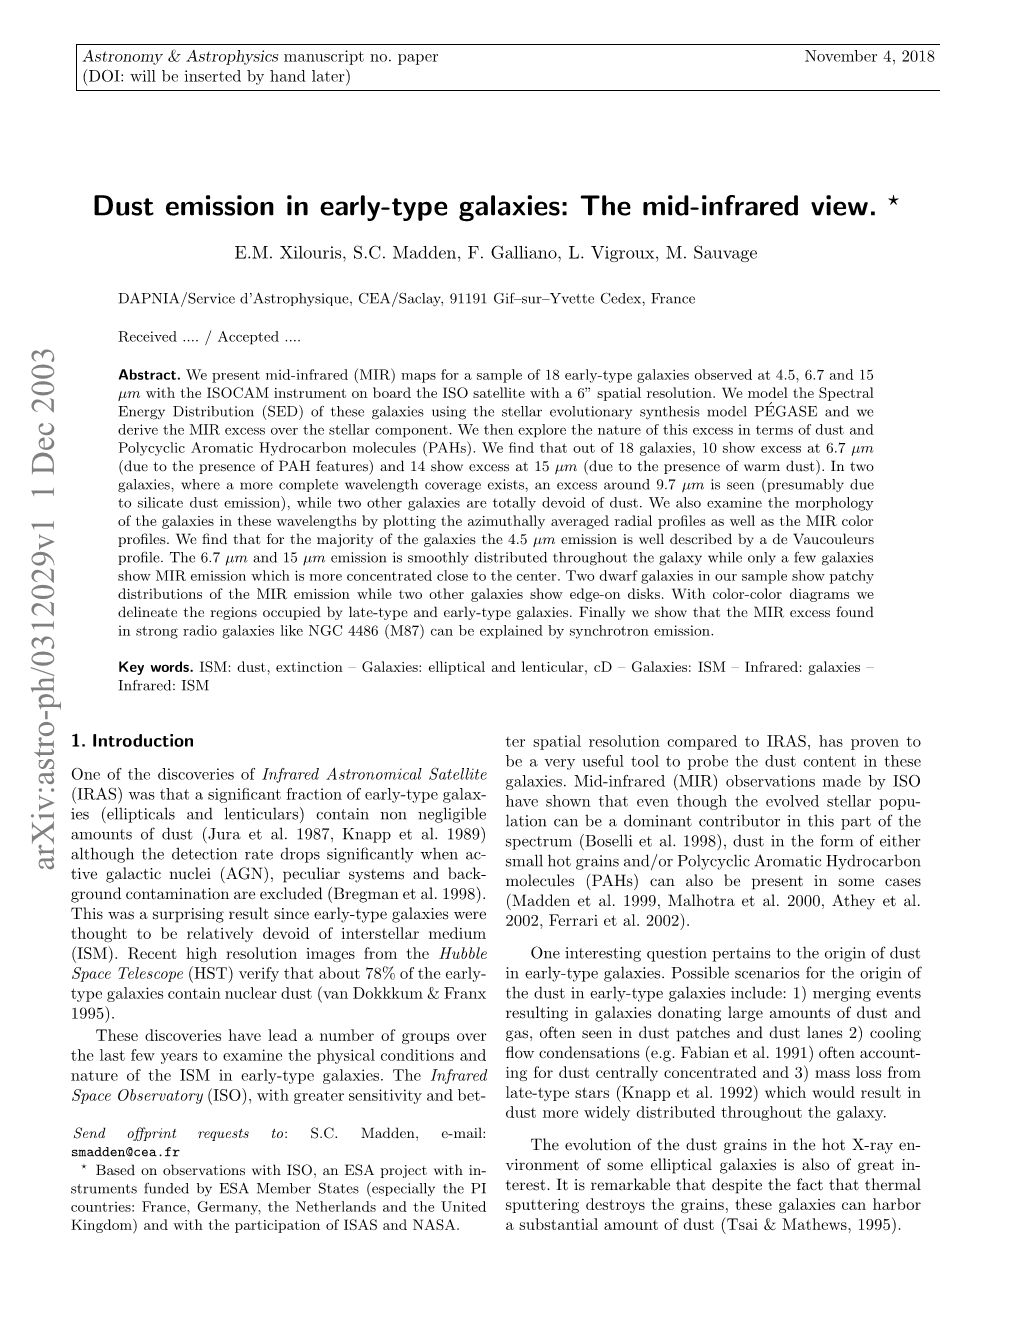 Dust Emission in Early-Type Galaxies: the Mid-Infrared View